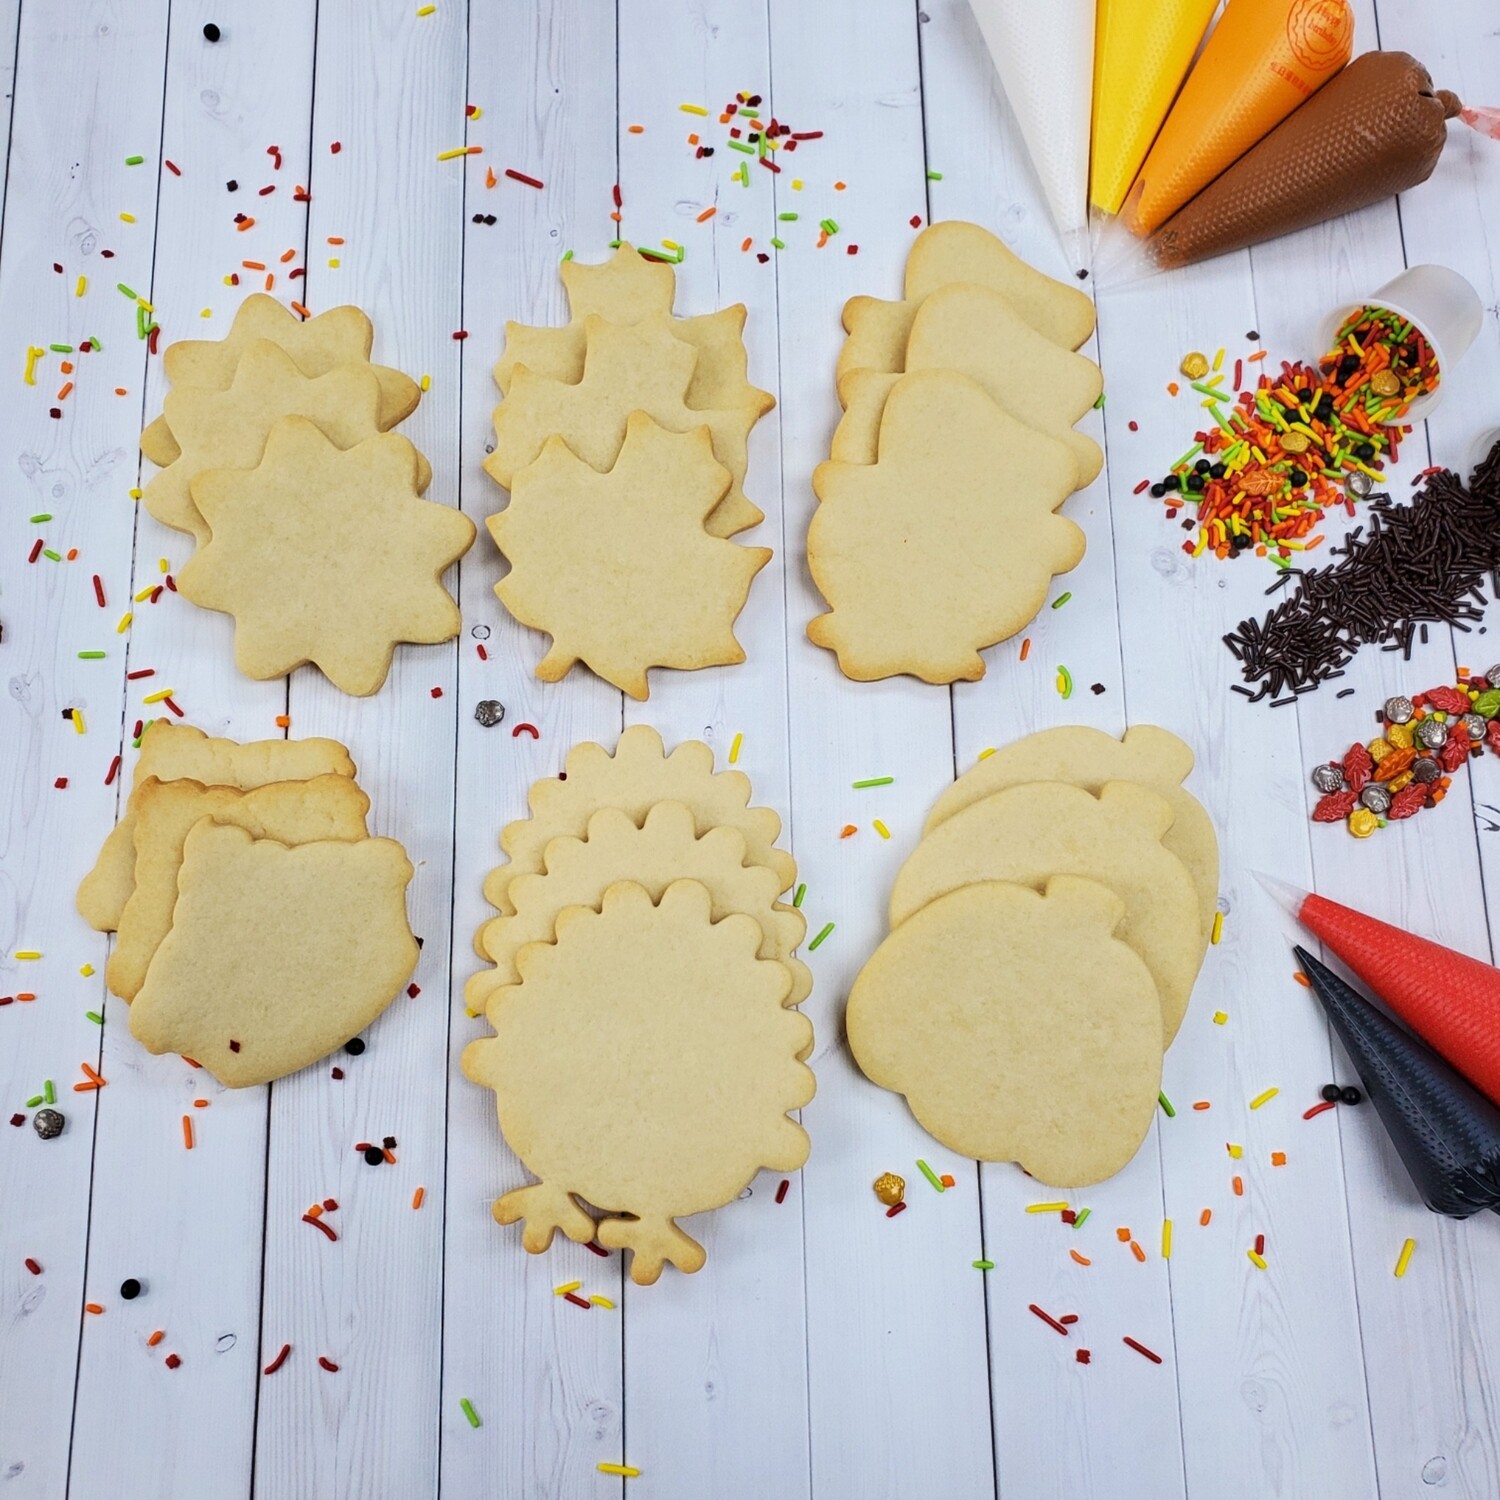 Decorate Your Own - Halloween/Fall Sugar Cookies